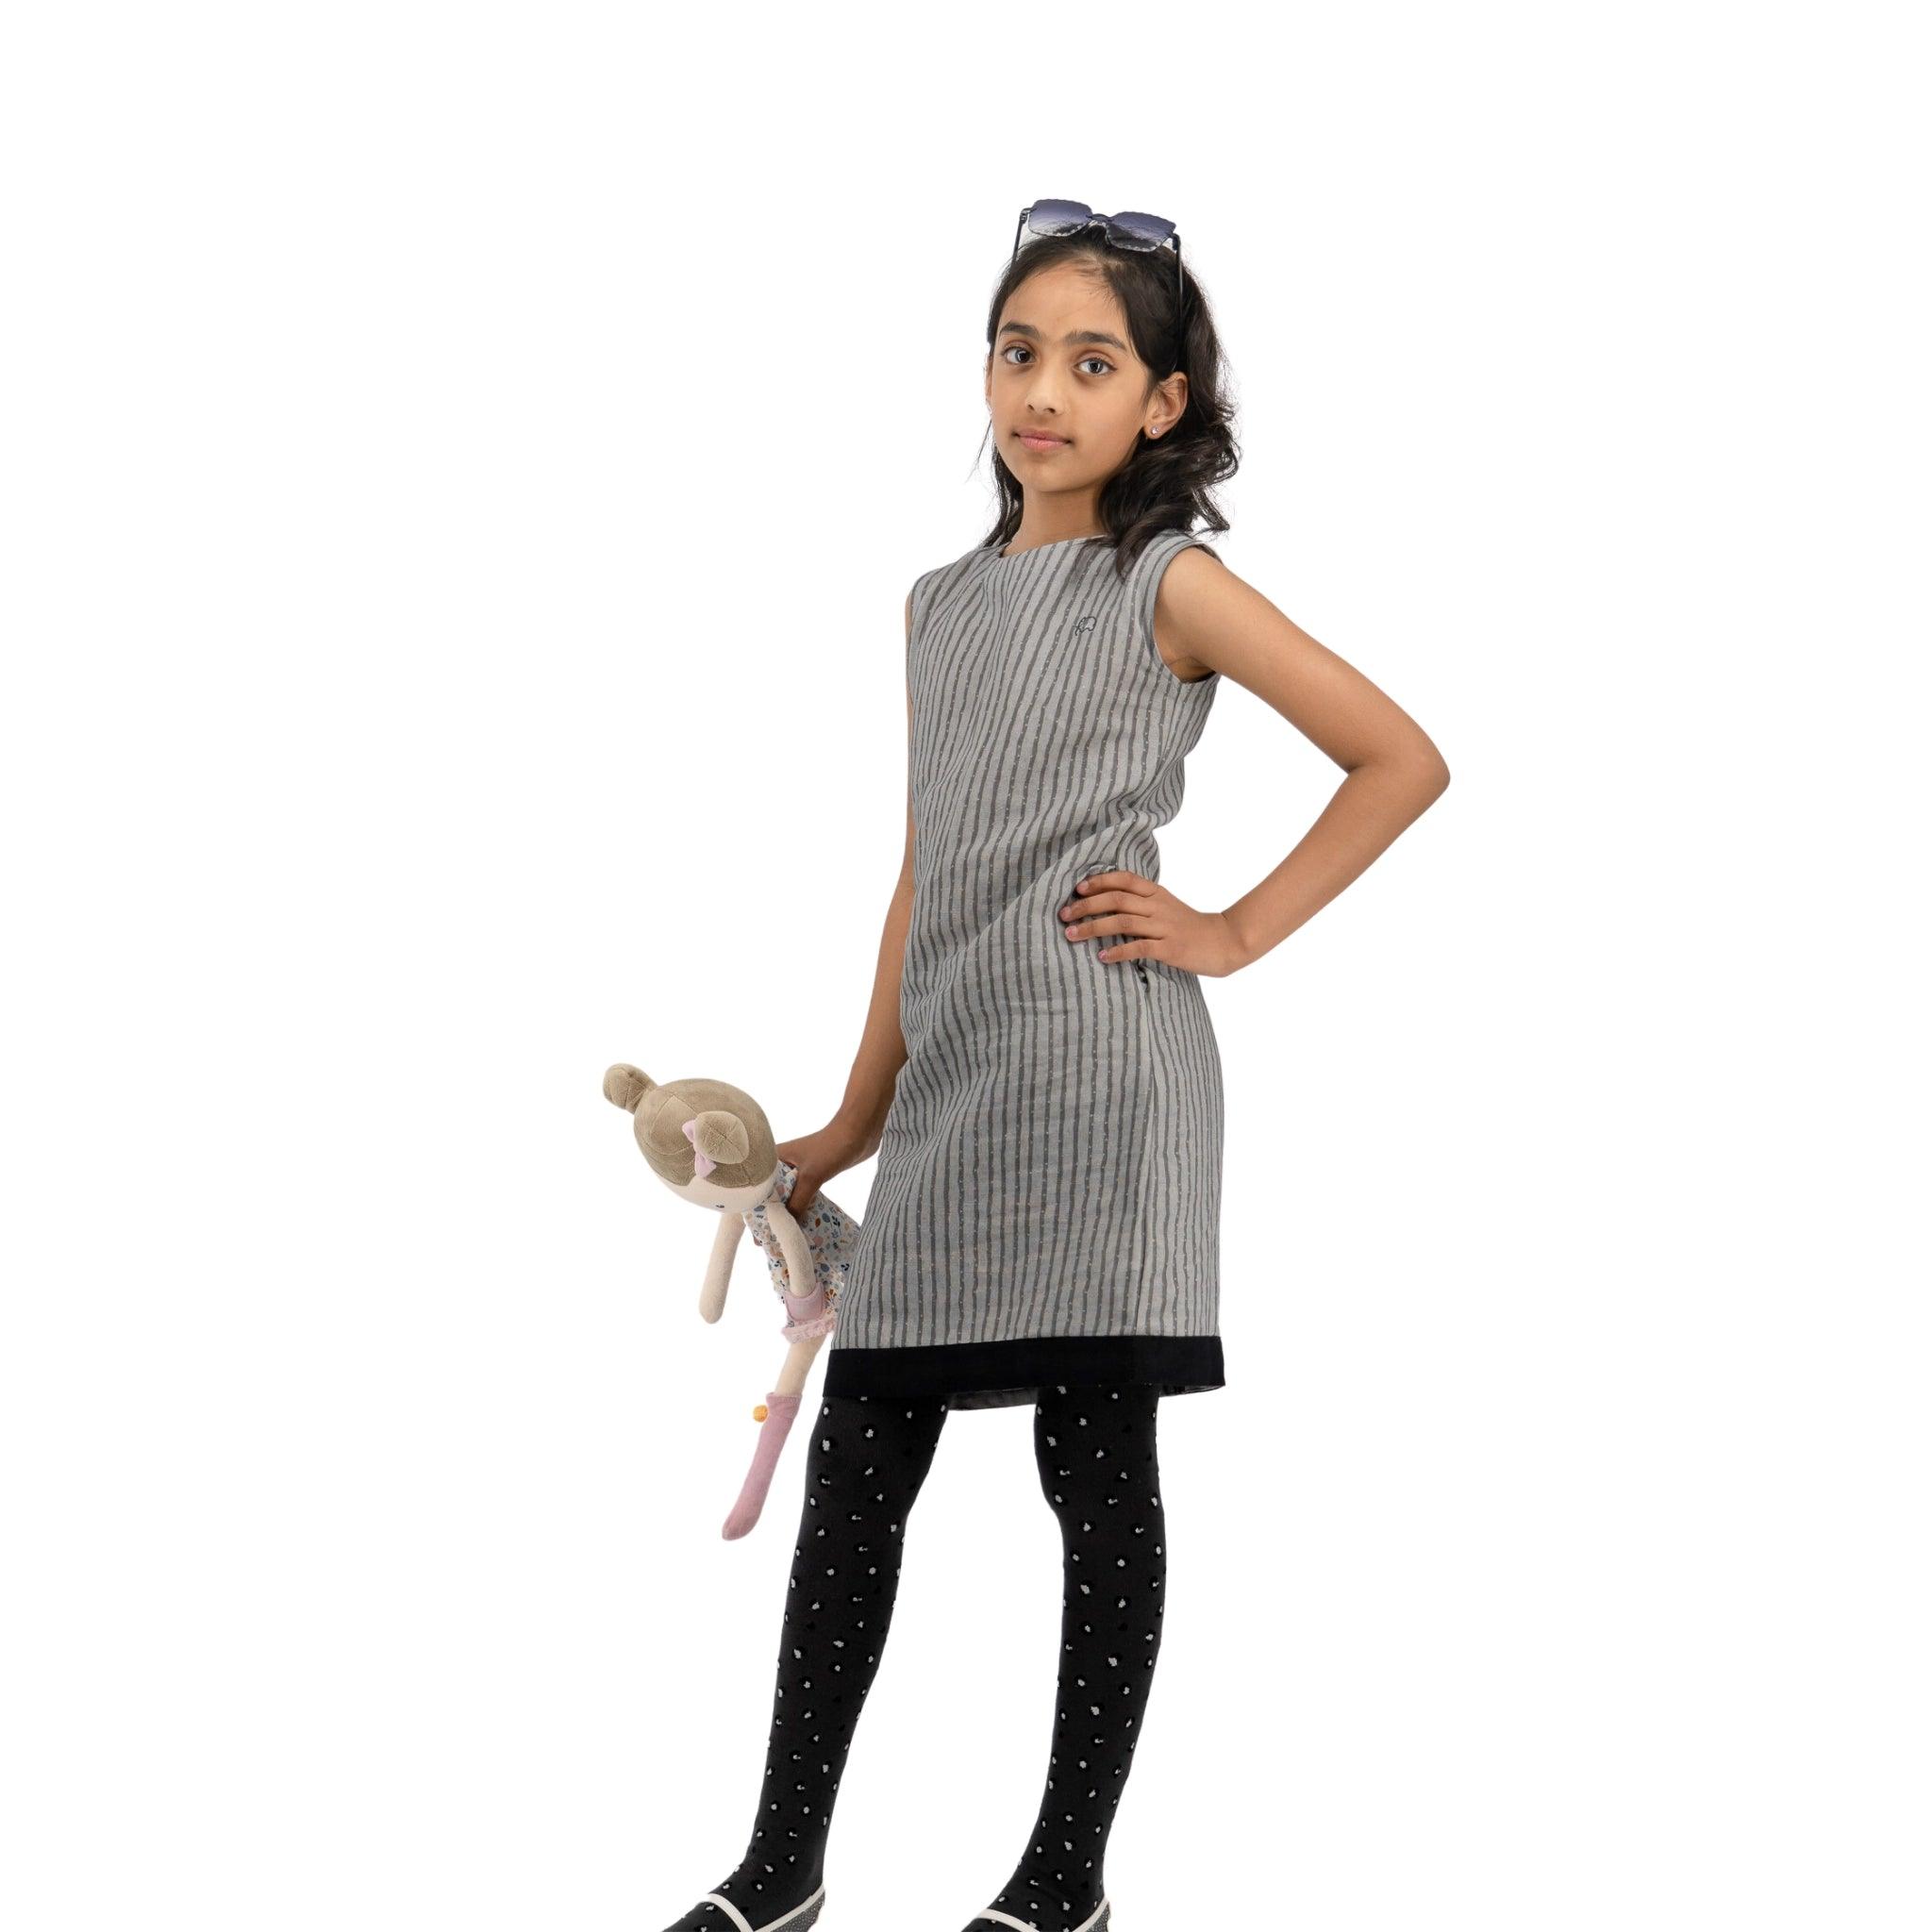 Young girl in a Karee Steel Grey Linen Cotton Round Neck Frock for Kids and polka-dot leggings, holding a plush toy, standing confidently with hands on hips against a white background.